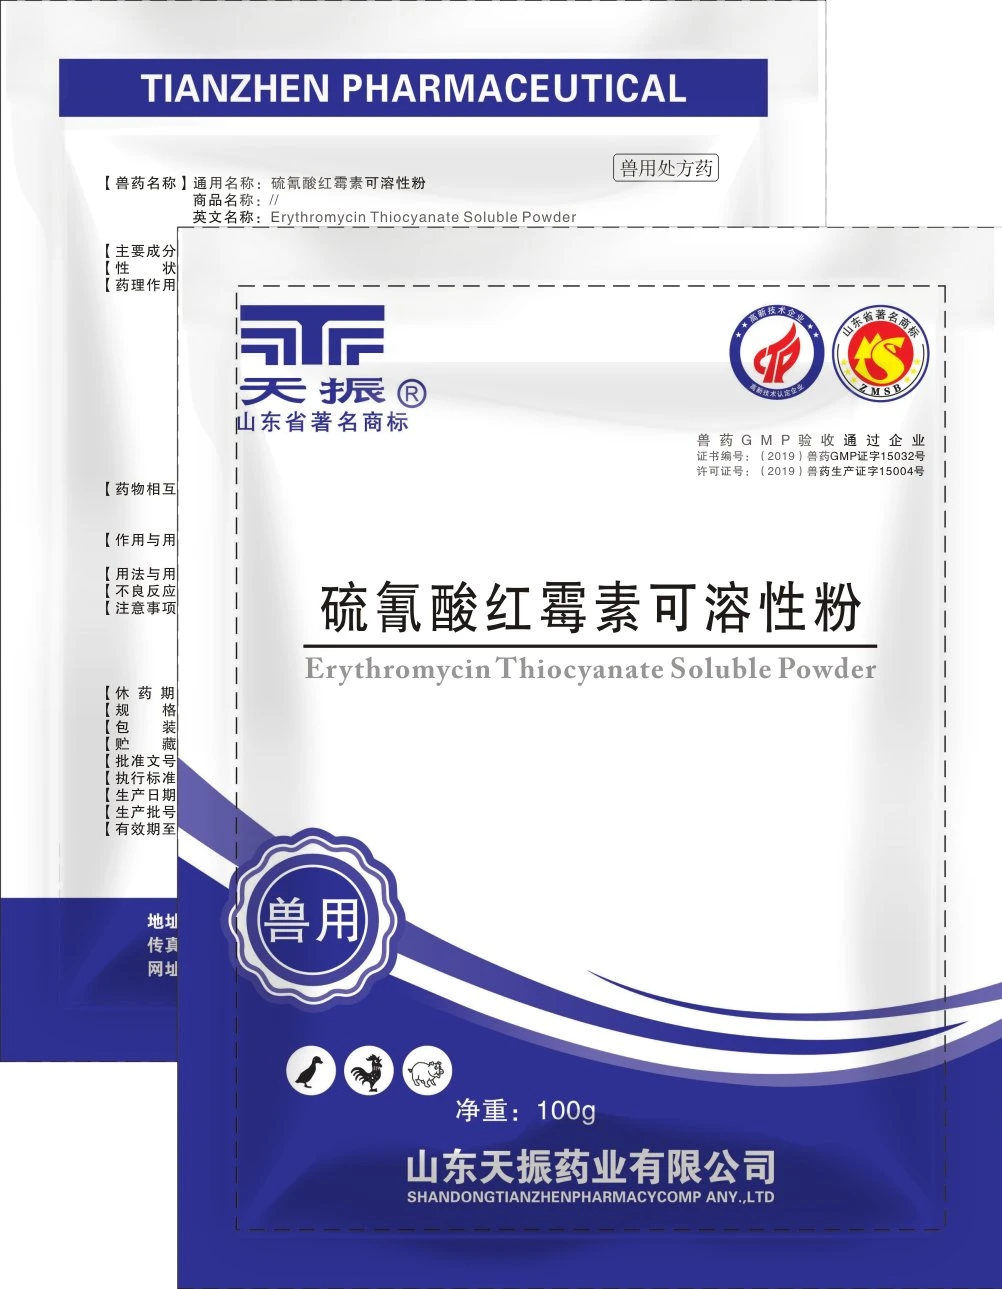 Erythromycin Thiocyanate Soluble Powder for Infectious Disease